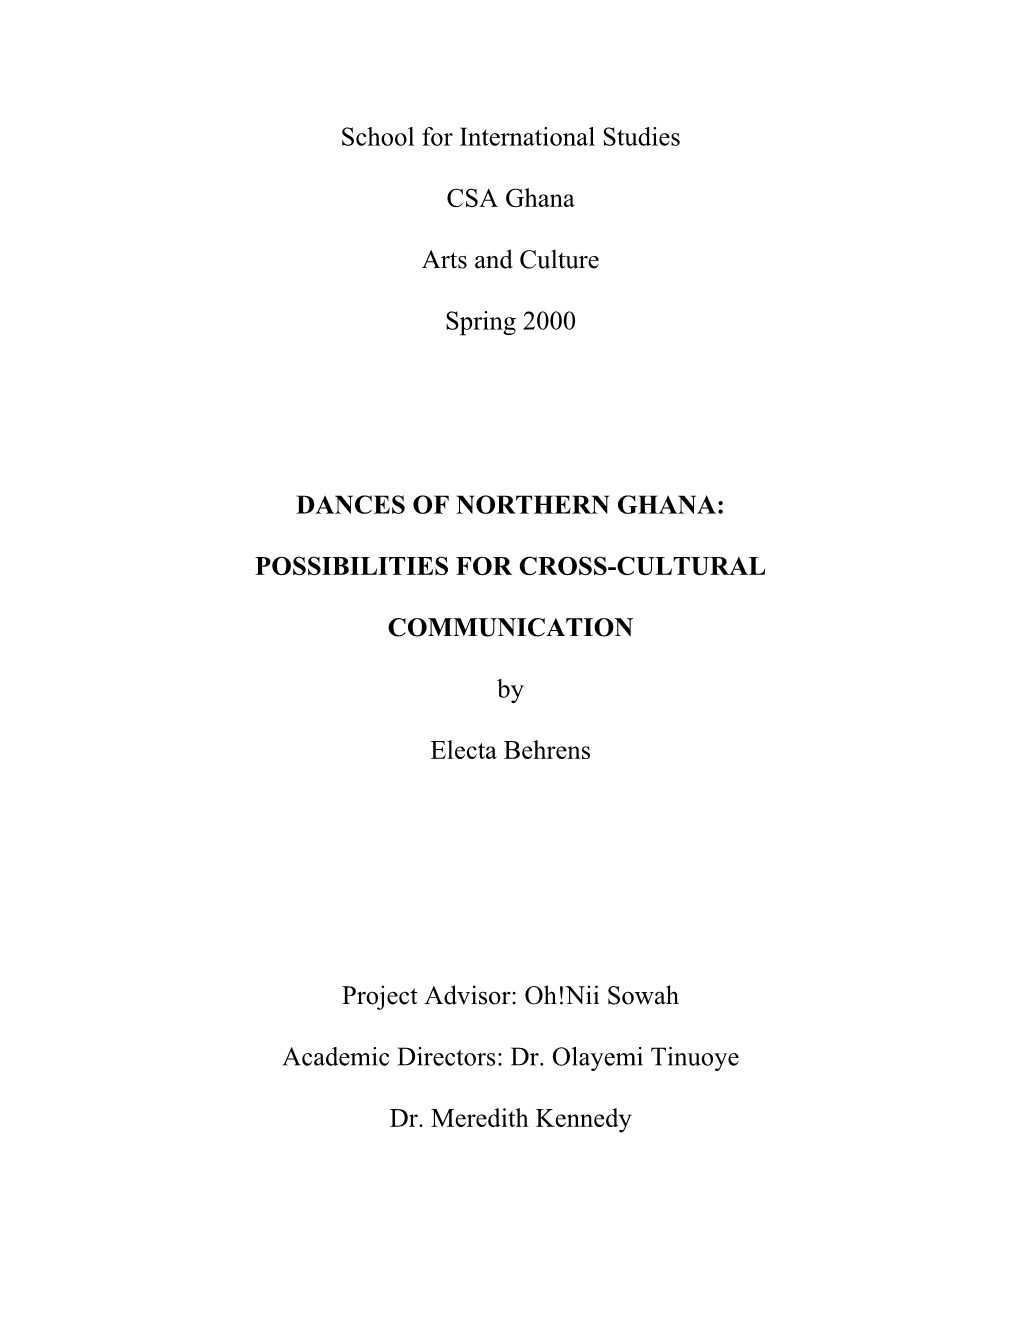 Dances of Northern Ghana: Possibilities for Cross-Cultural Communication